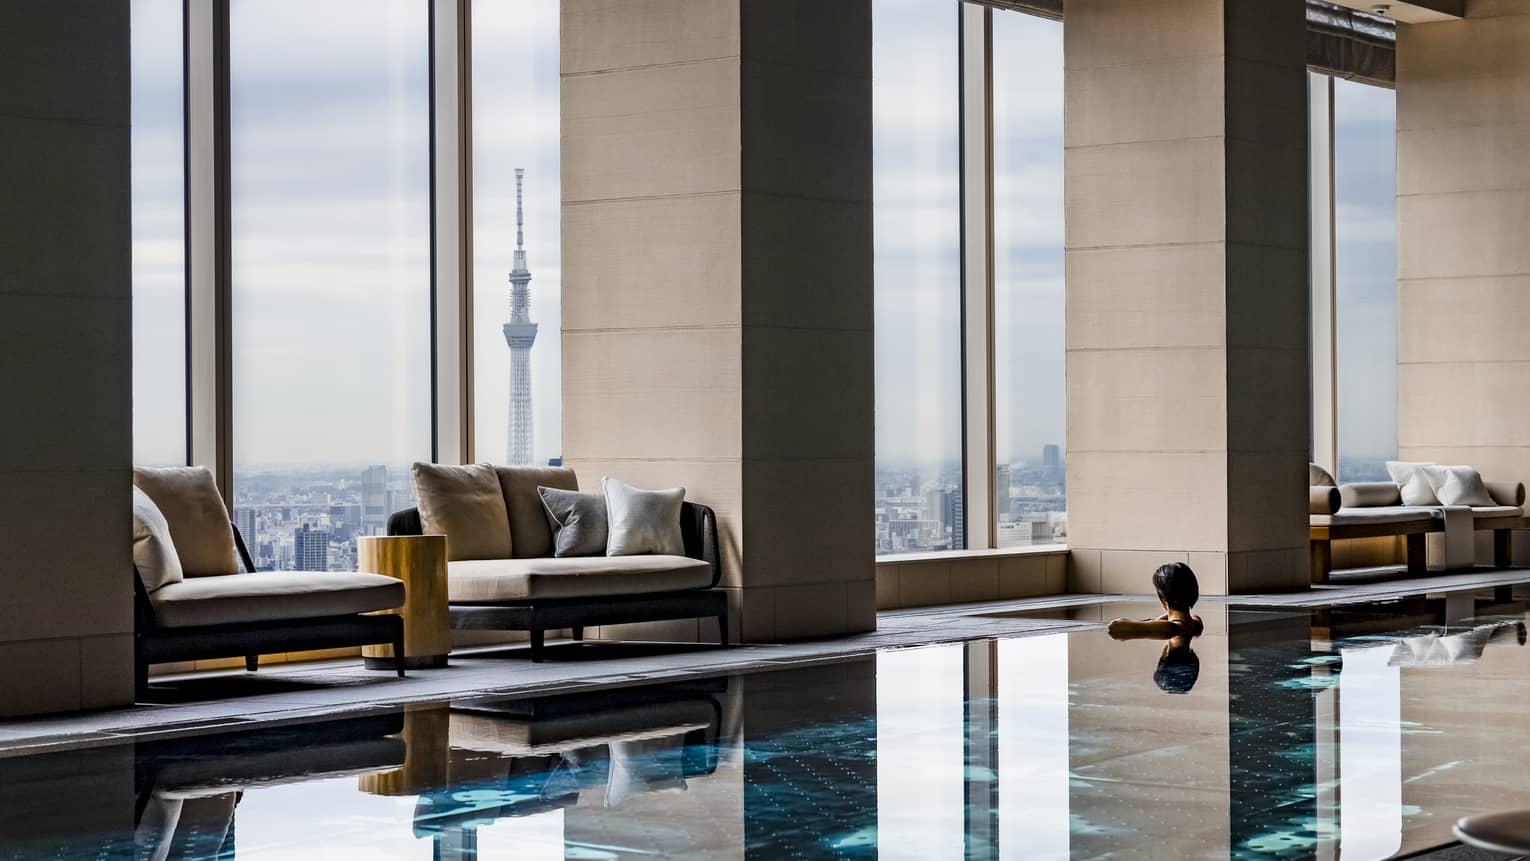 Indoor pool with sparkling cerulean water, pool chairs and floor-to-ceiling windows overlooking the city